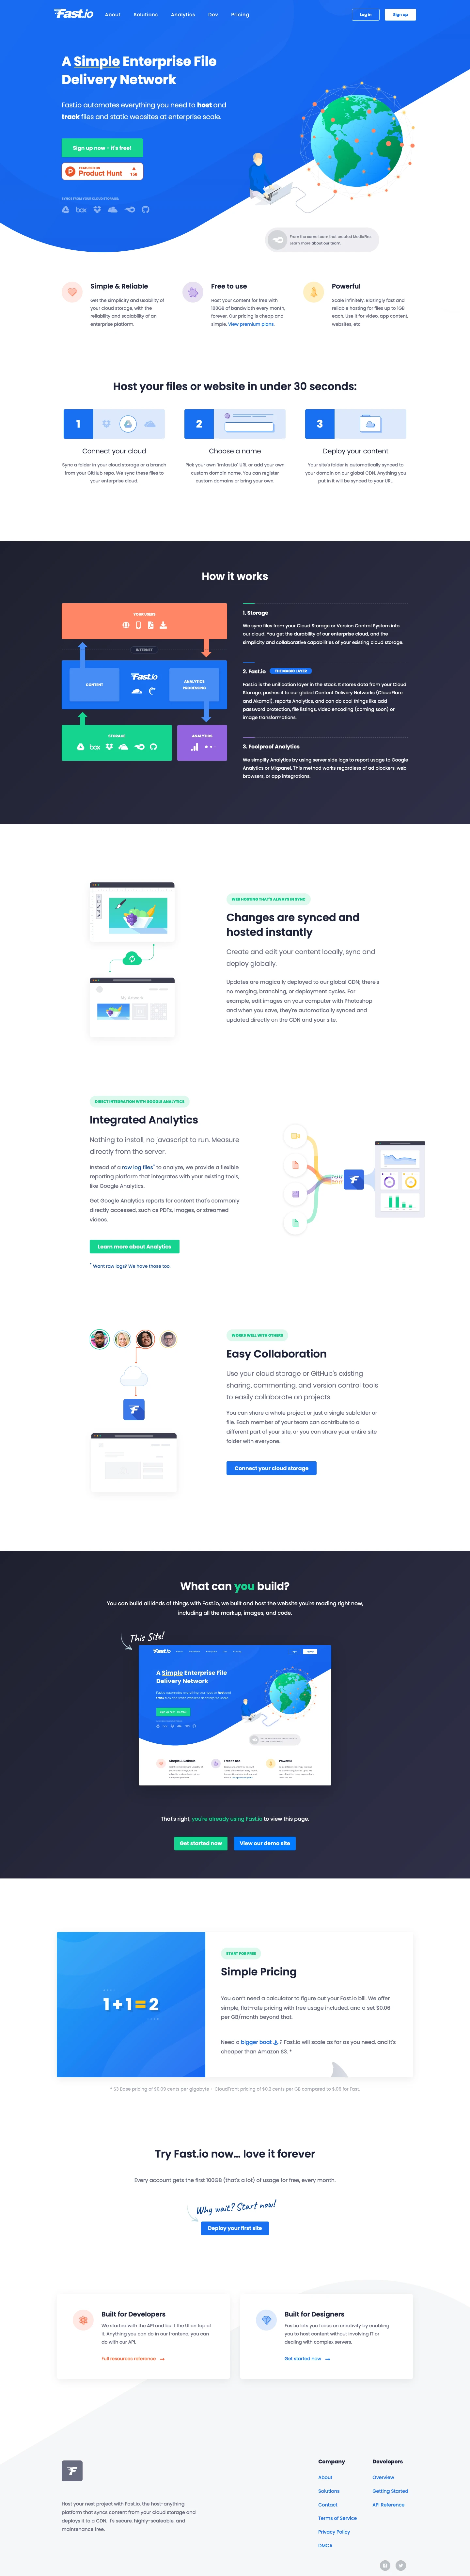 Fast.io Landing Page Example: An all-in-one platform to simply host websites and files up to 1GB, with custom domains, and analytics.